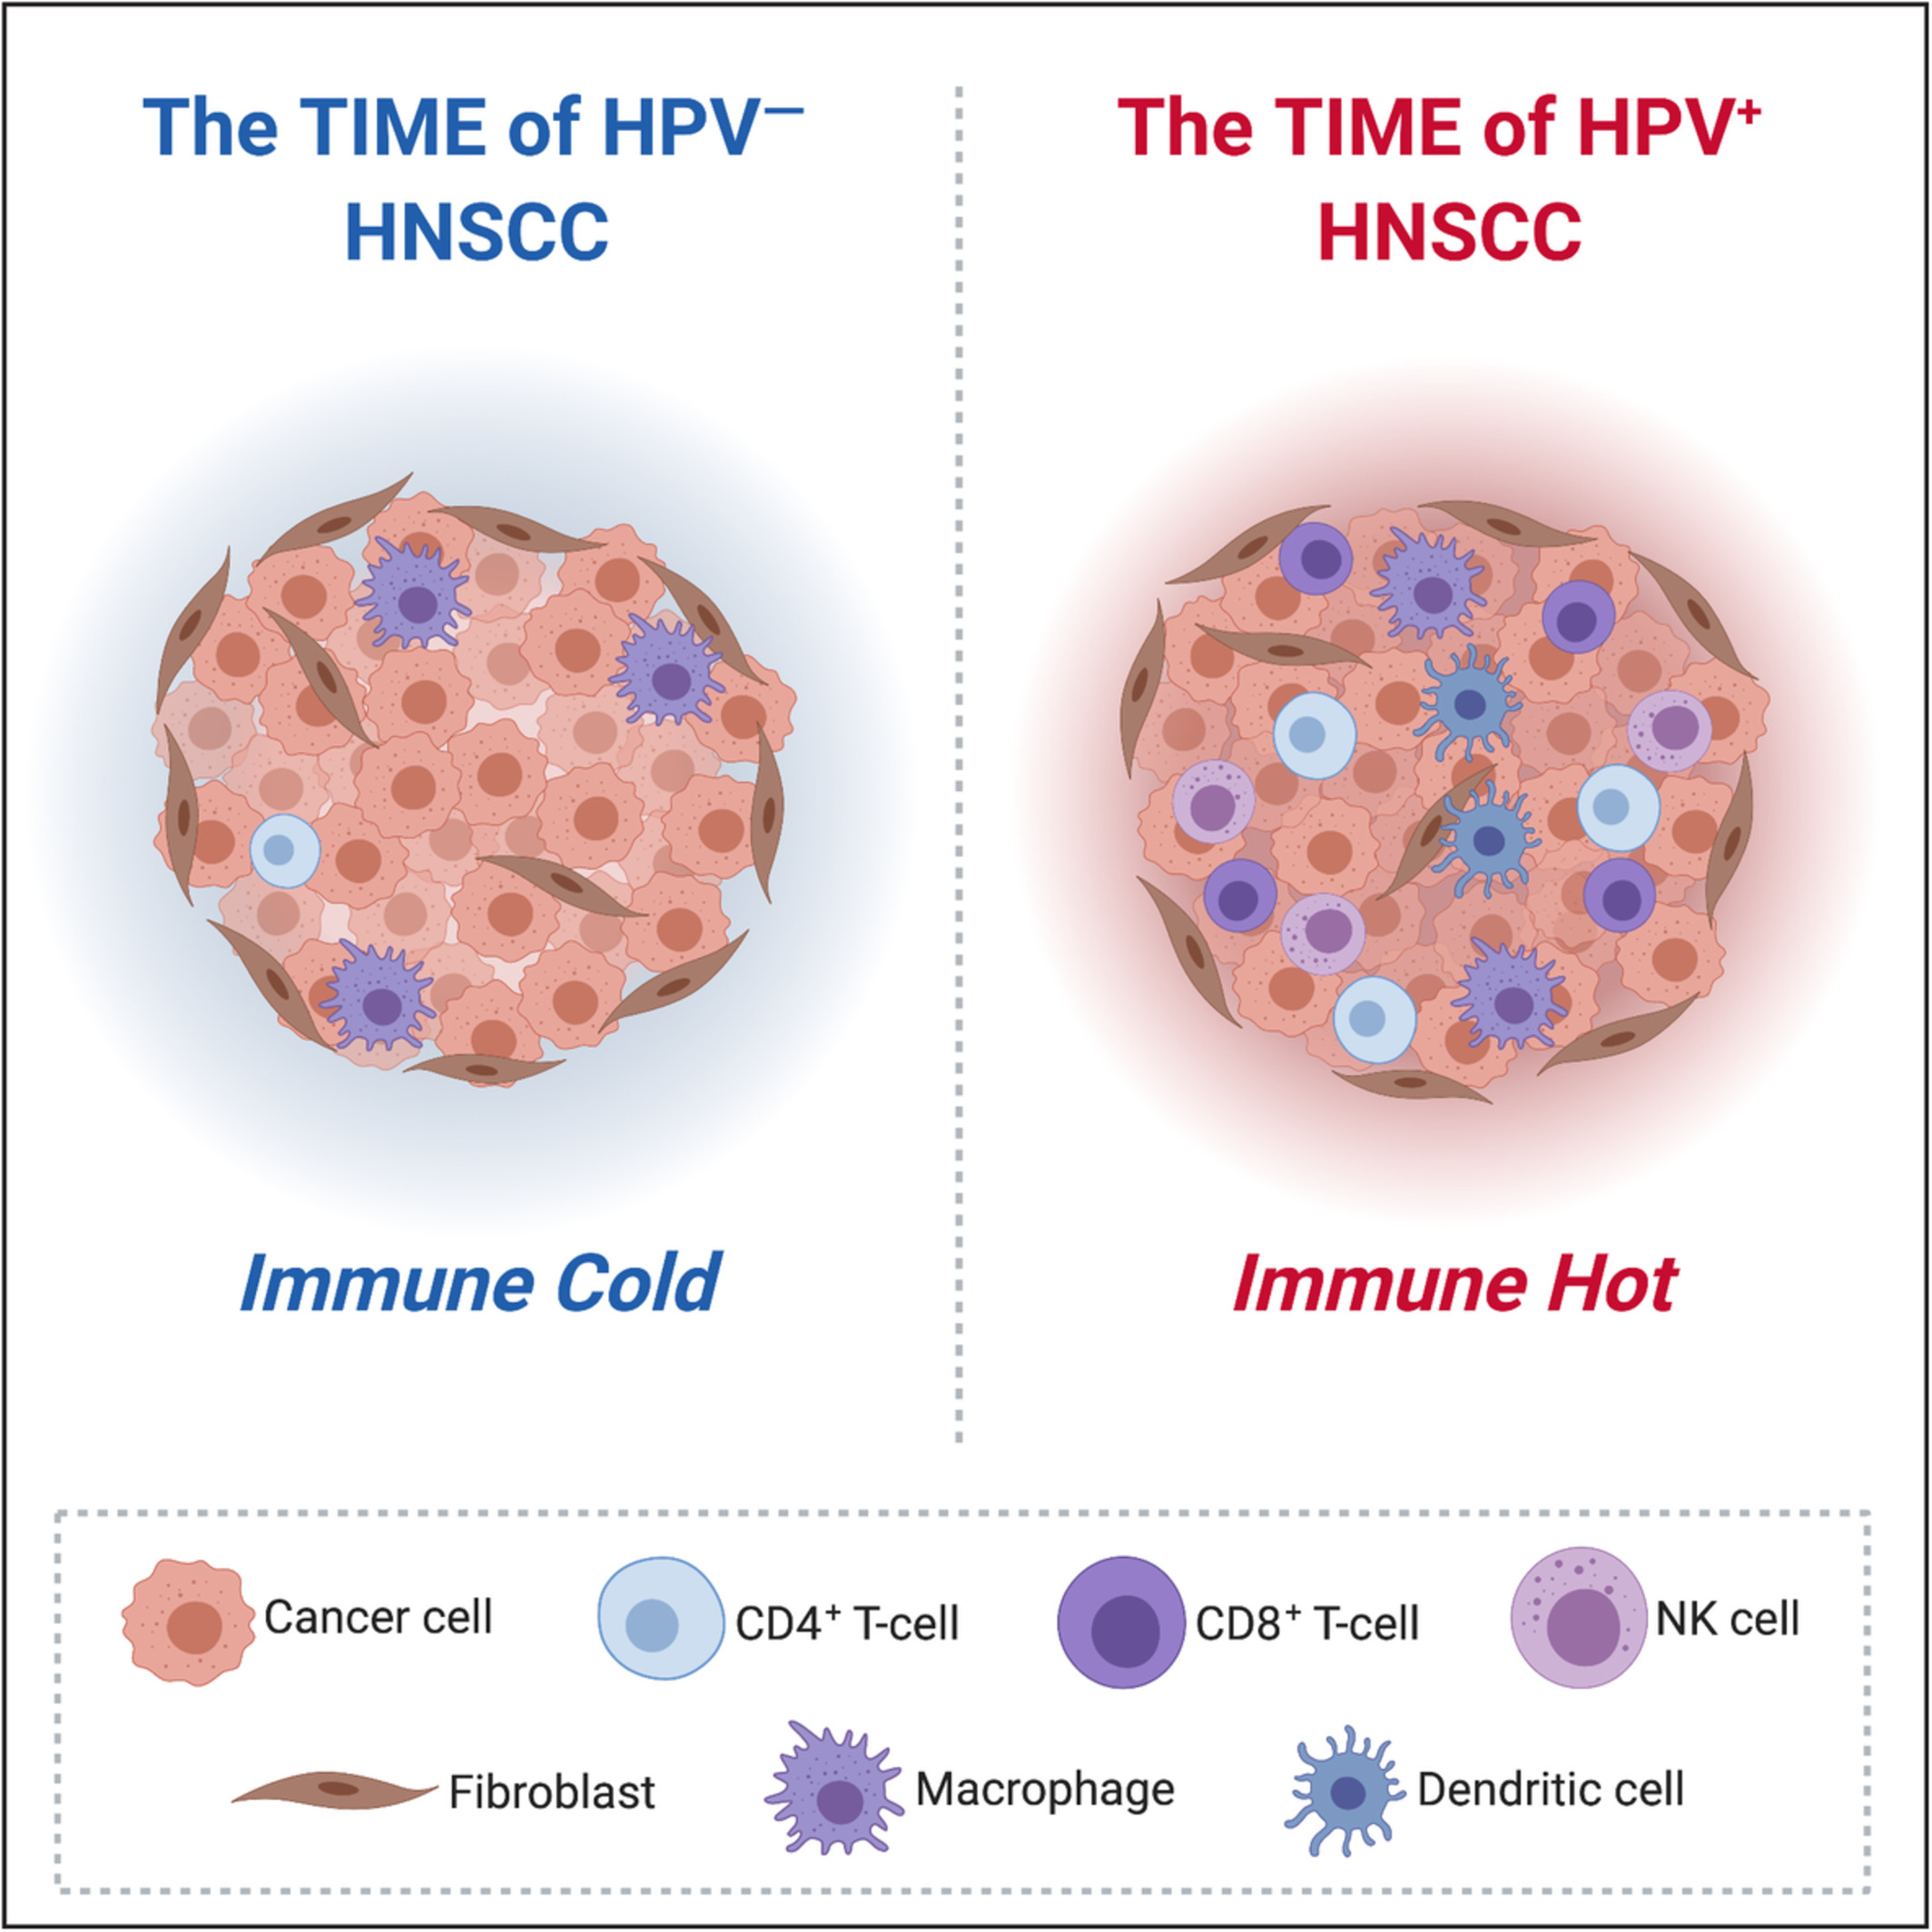 The tumor immune microenvironments of HPV+ and HPV− head and neck cancers